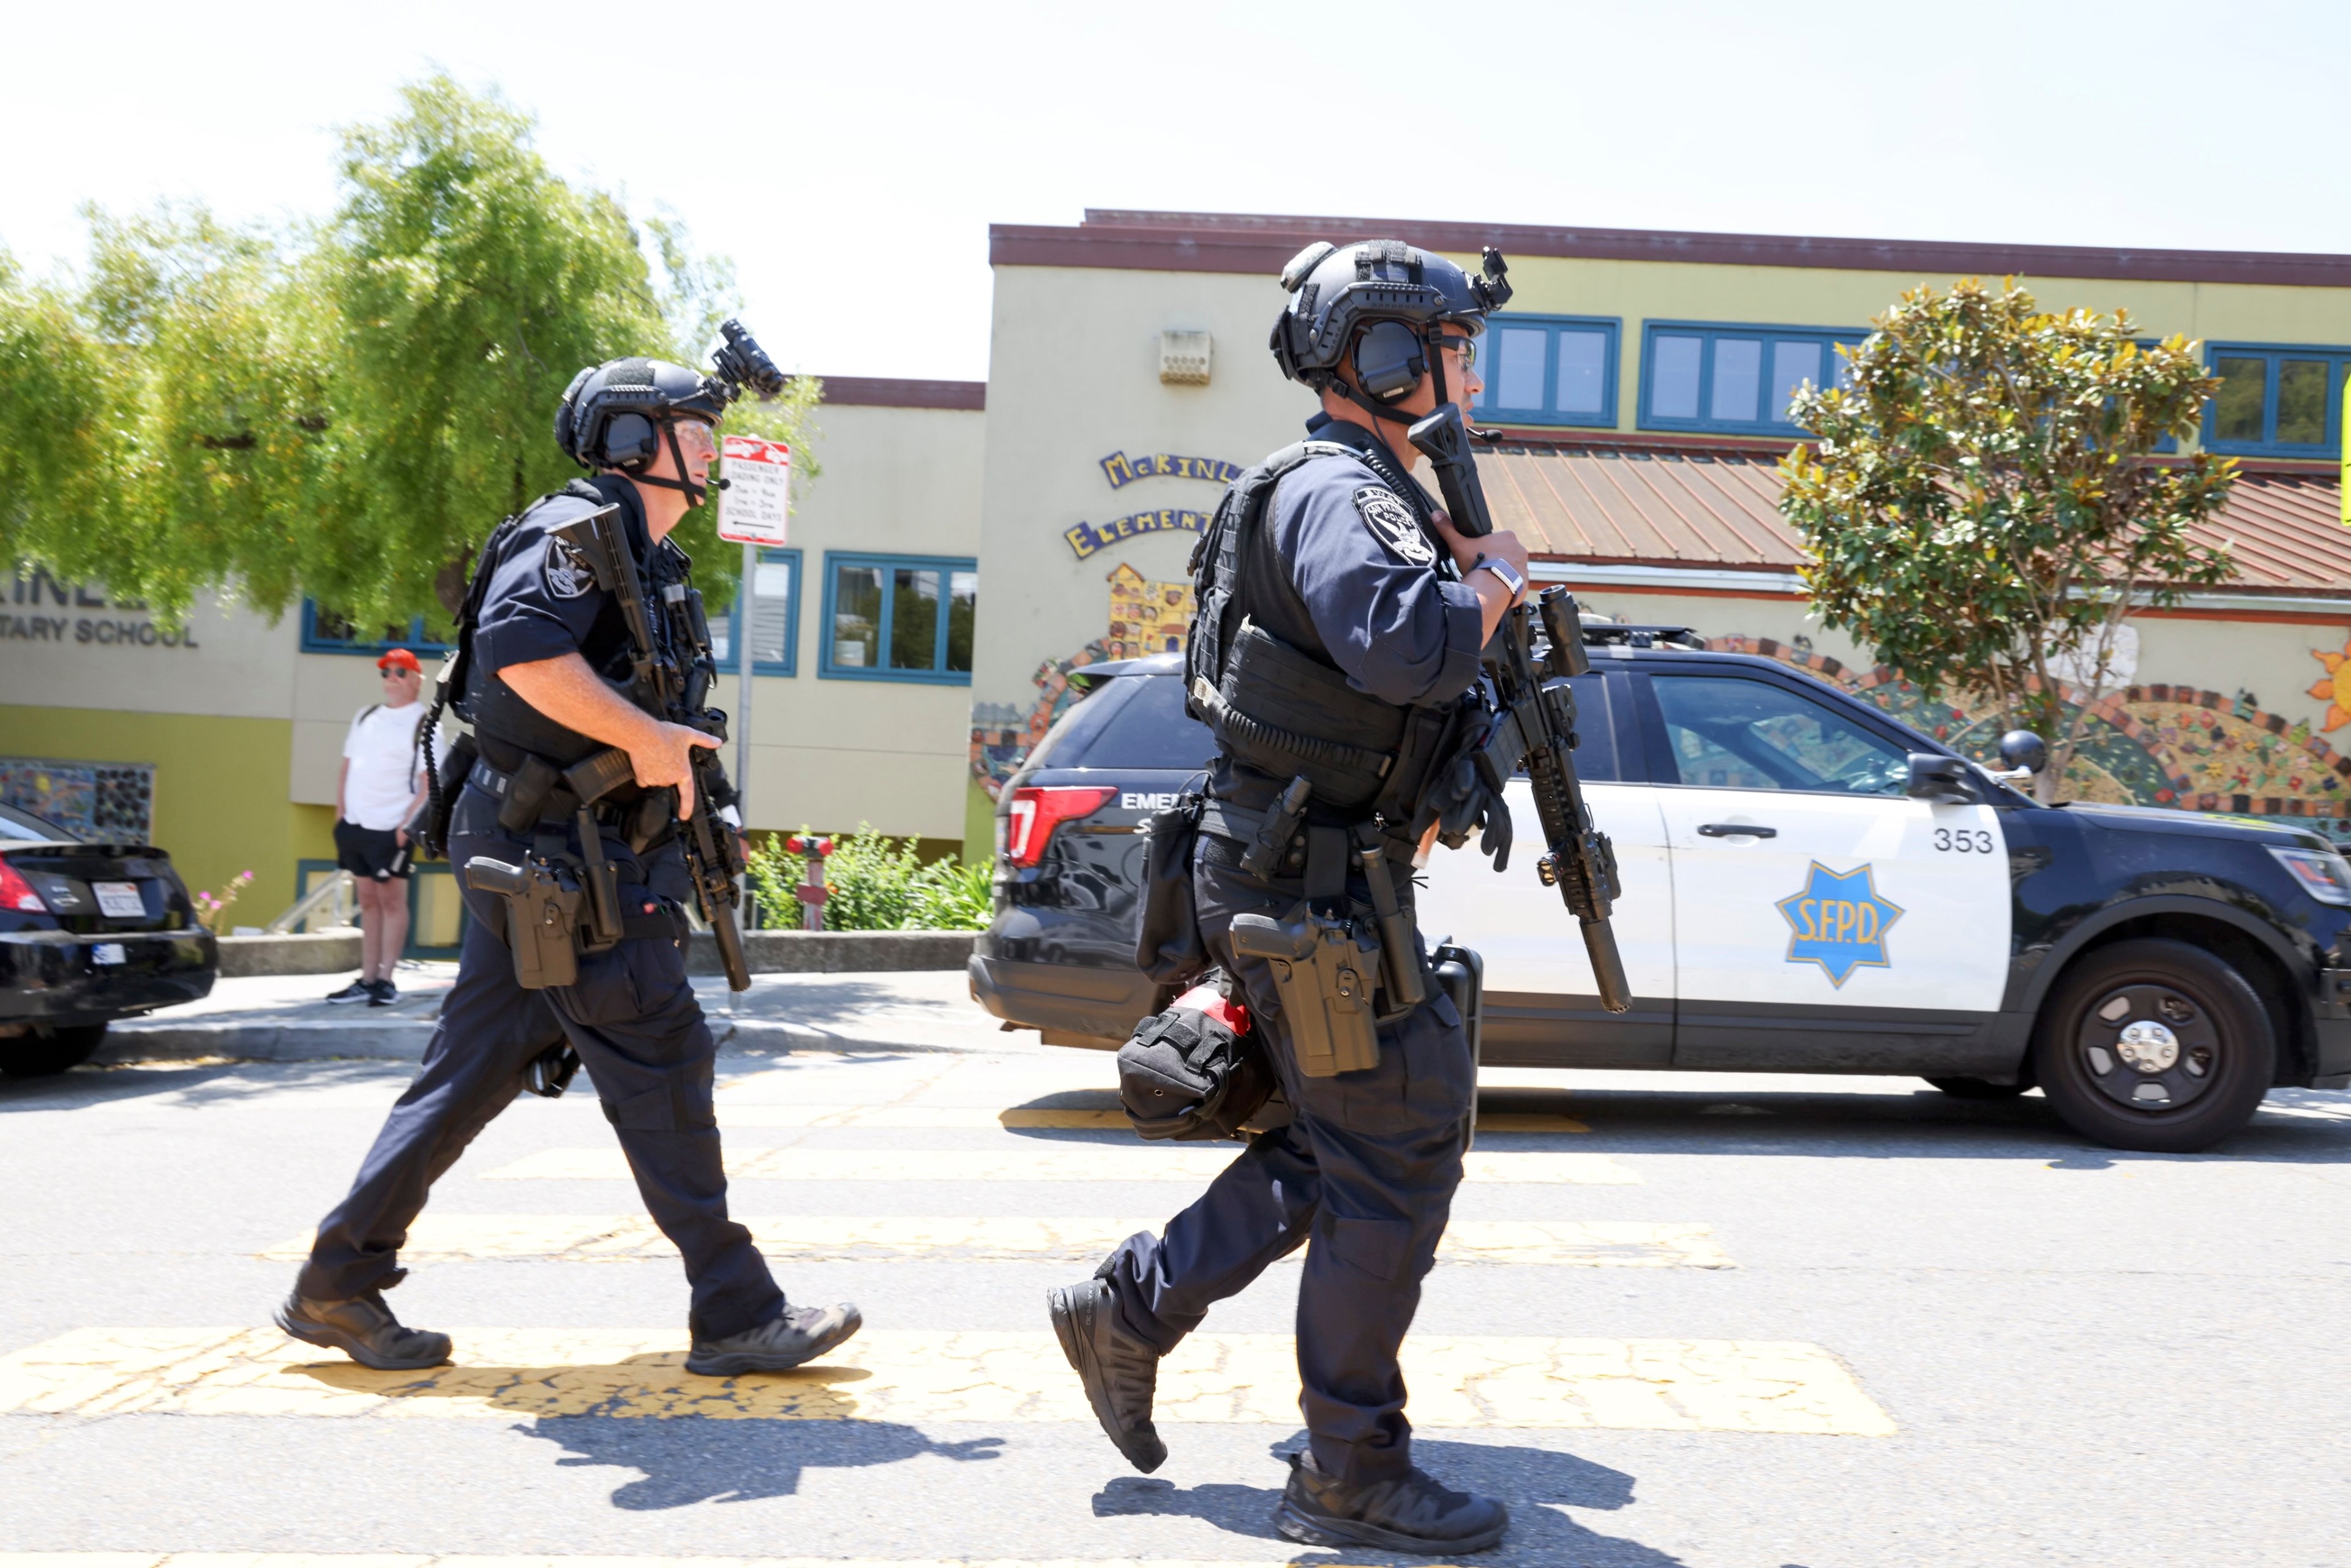 Police officers wearing helmets and carrying rifles hurry down a street.